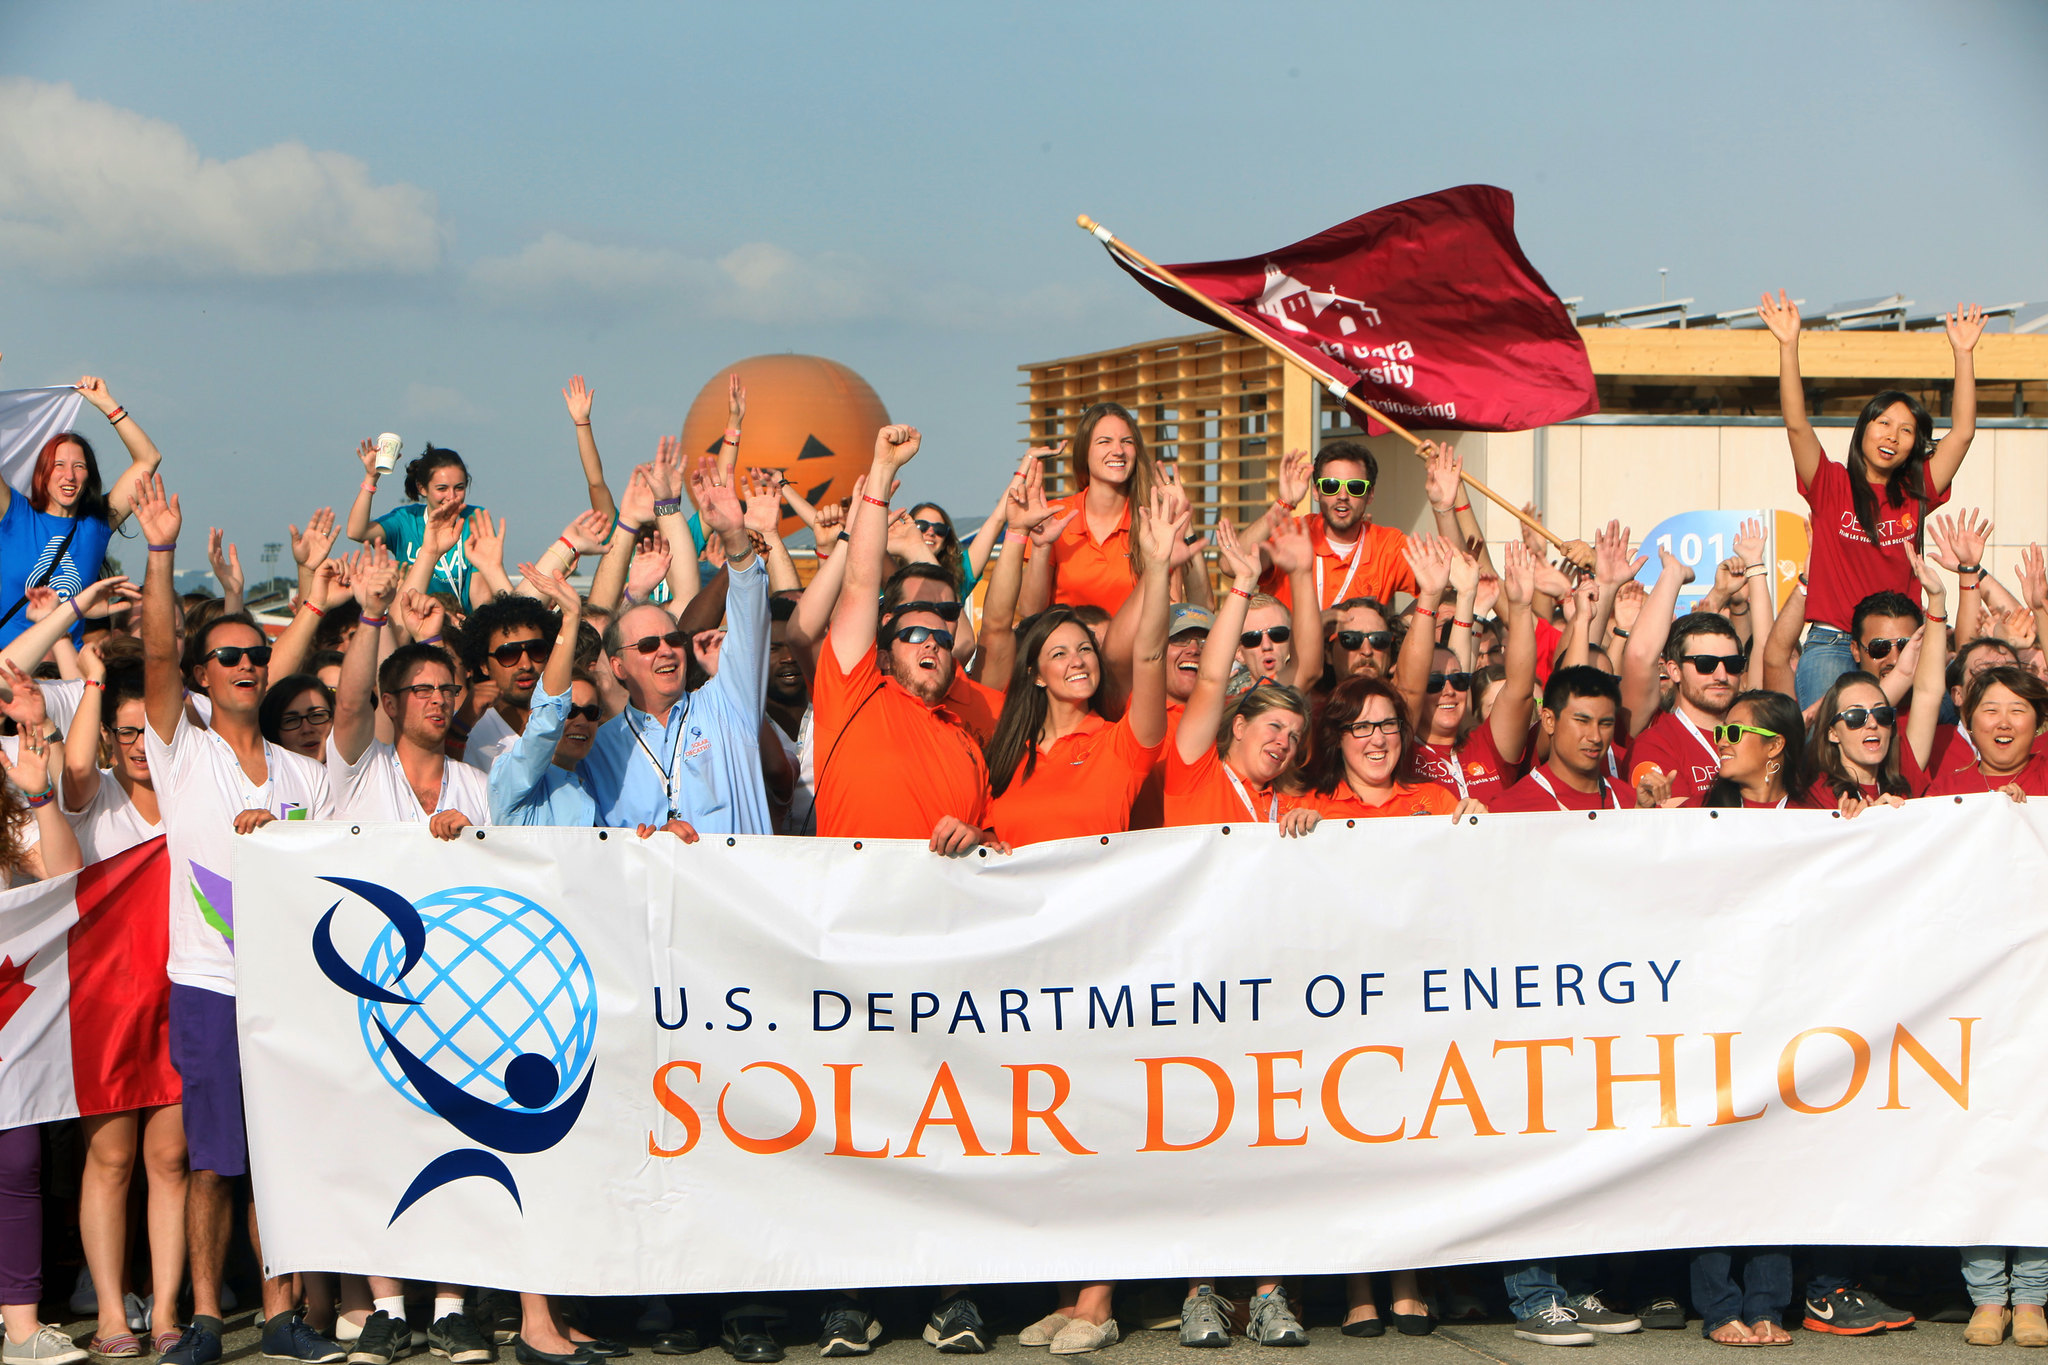 A group of people holding a solar decathlon banner.